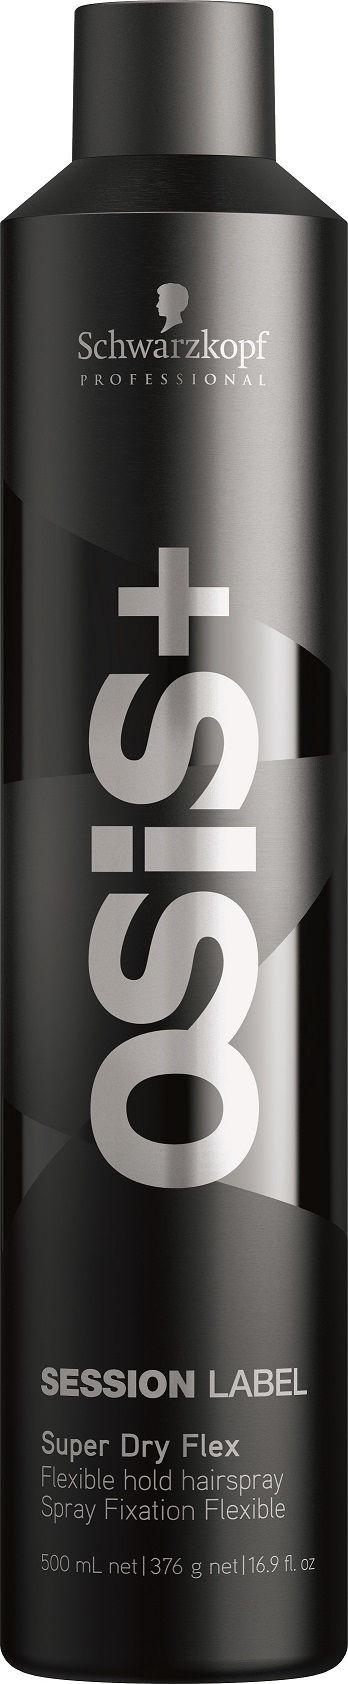 Schwarzkopf Professional Osis + Session Label Flexible Hold Hair Spray